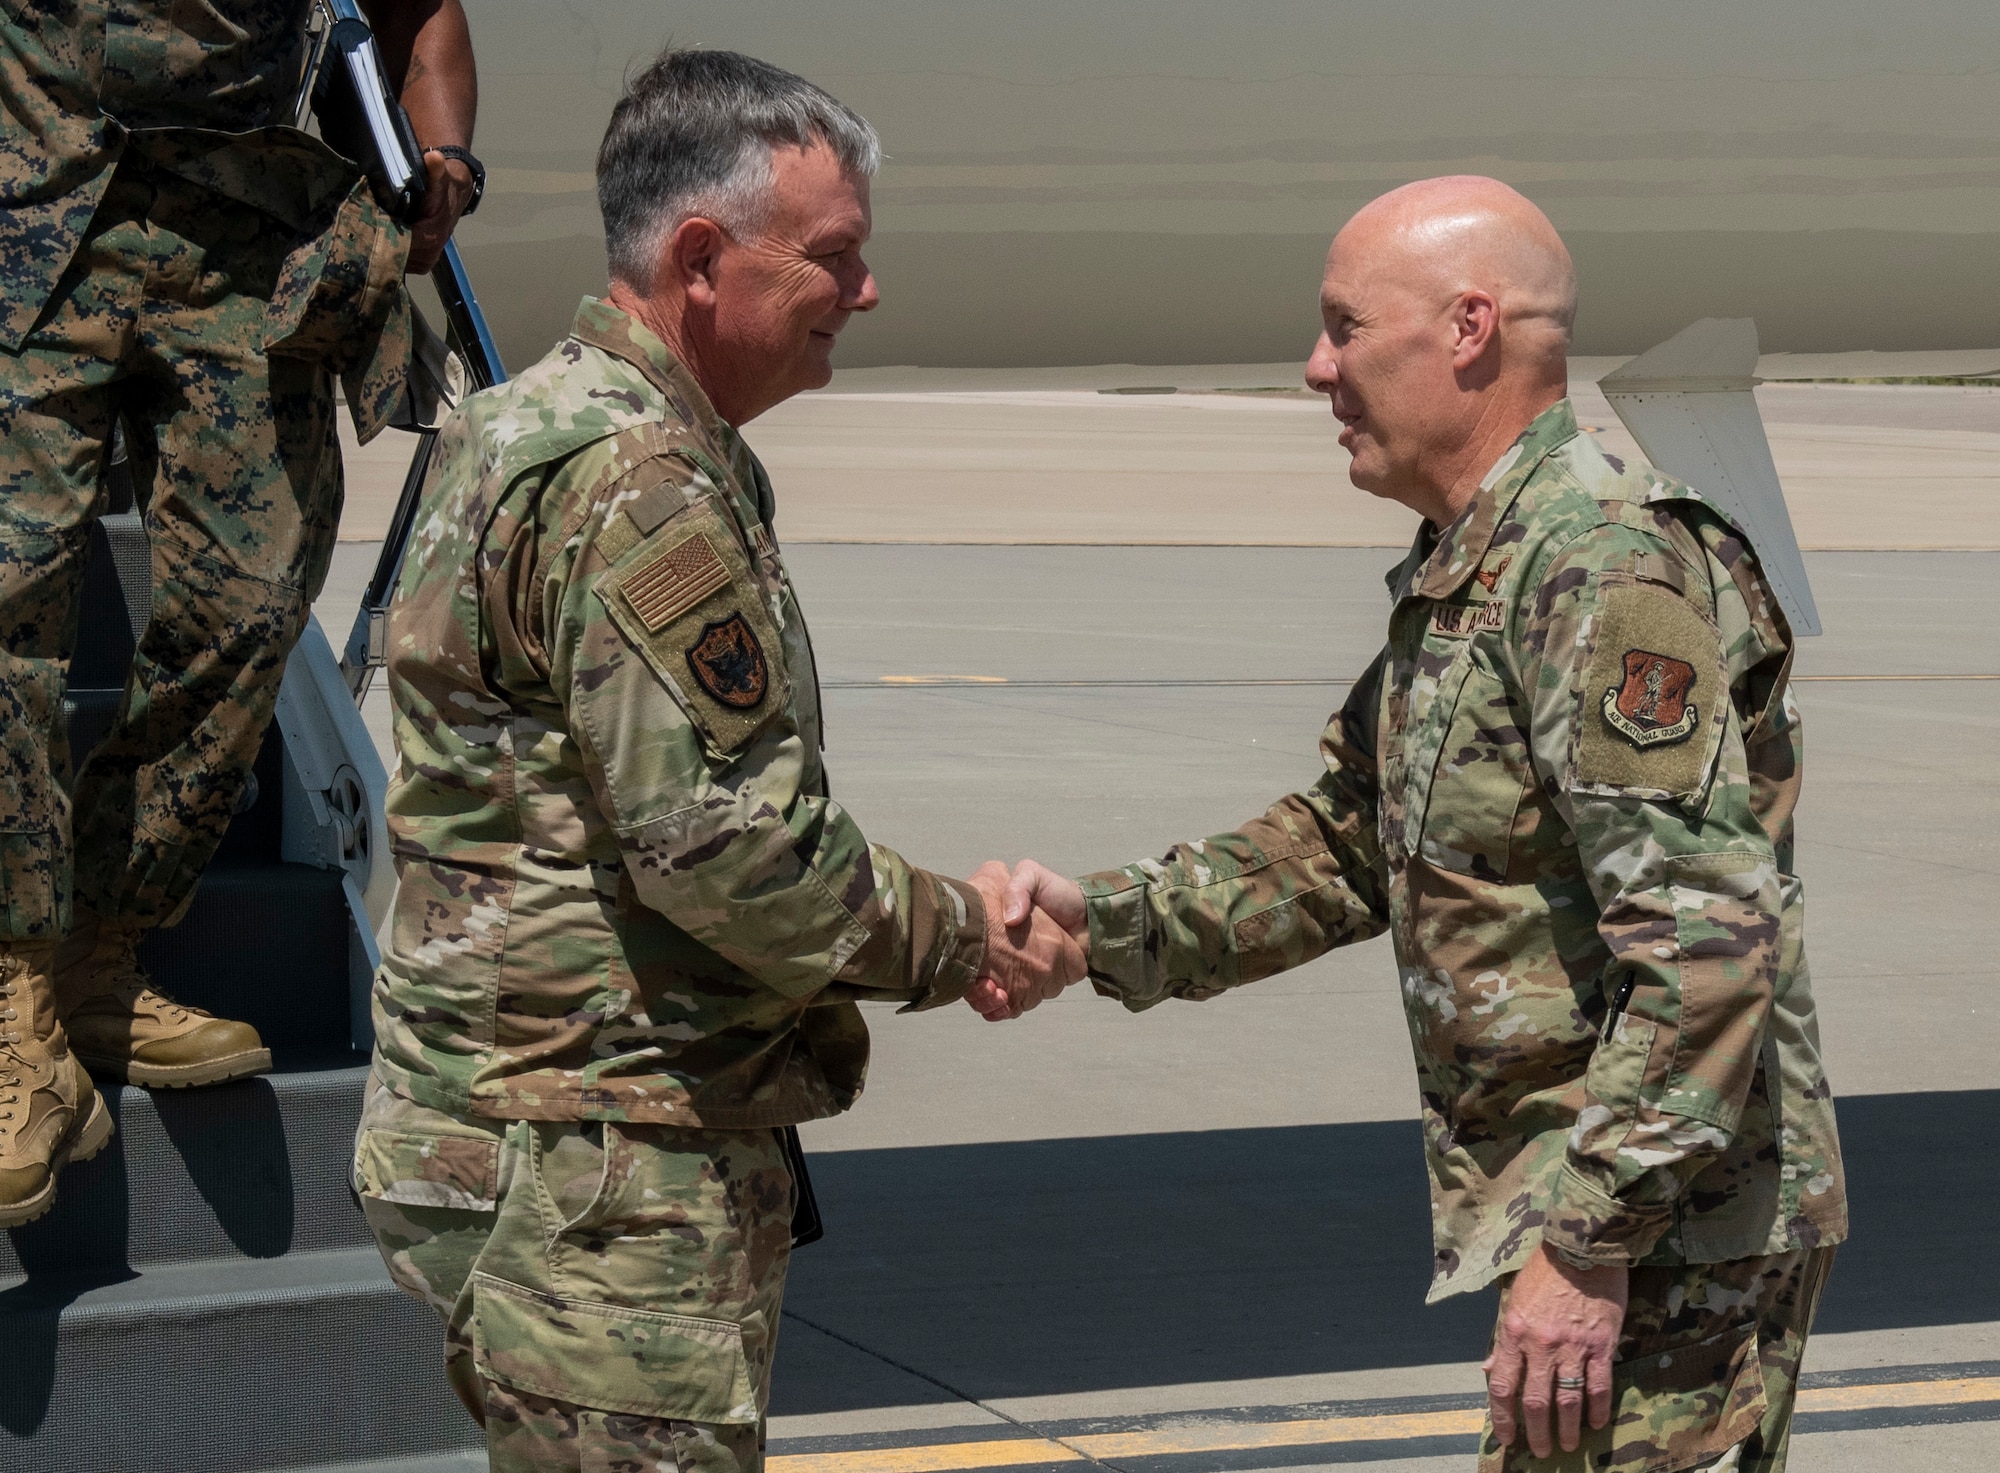 Gen. Glen VanHerck, left, Commander, North American Aerospace Defense Command and U.S. Northern Command, is welcomed to Holloman Air Force Base by Brig. Gen. Daniel Gabrielli, Task Force - Holloman commander, Sept. 7, 2021.  Gen. VanHerck was joined by Sgt. Maj. James Porterfield, Command Senior Enlisted Leader, NORAD and USNRTHCOM; Mr. Terry Todd, Department of Homeland Security's Federal Coordinator at Holloman AFB; Mr. Joe Parente, Department of State Team Lead; Rep. Melanie Stansbury (D-NM-1) and Rep. Yvette Herrell (R-NM-2), in touring housing facilities and other support functions for the Afghan evacuees on the installation. (U.S. Air Force photo by Staff Sgt. Kenneth Boyton)